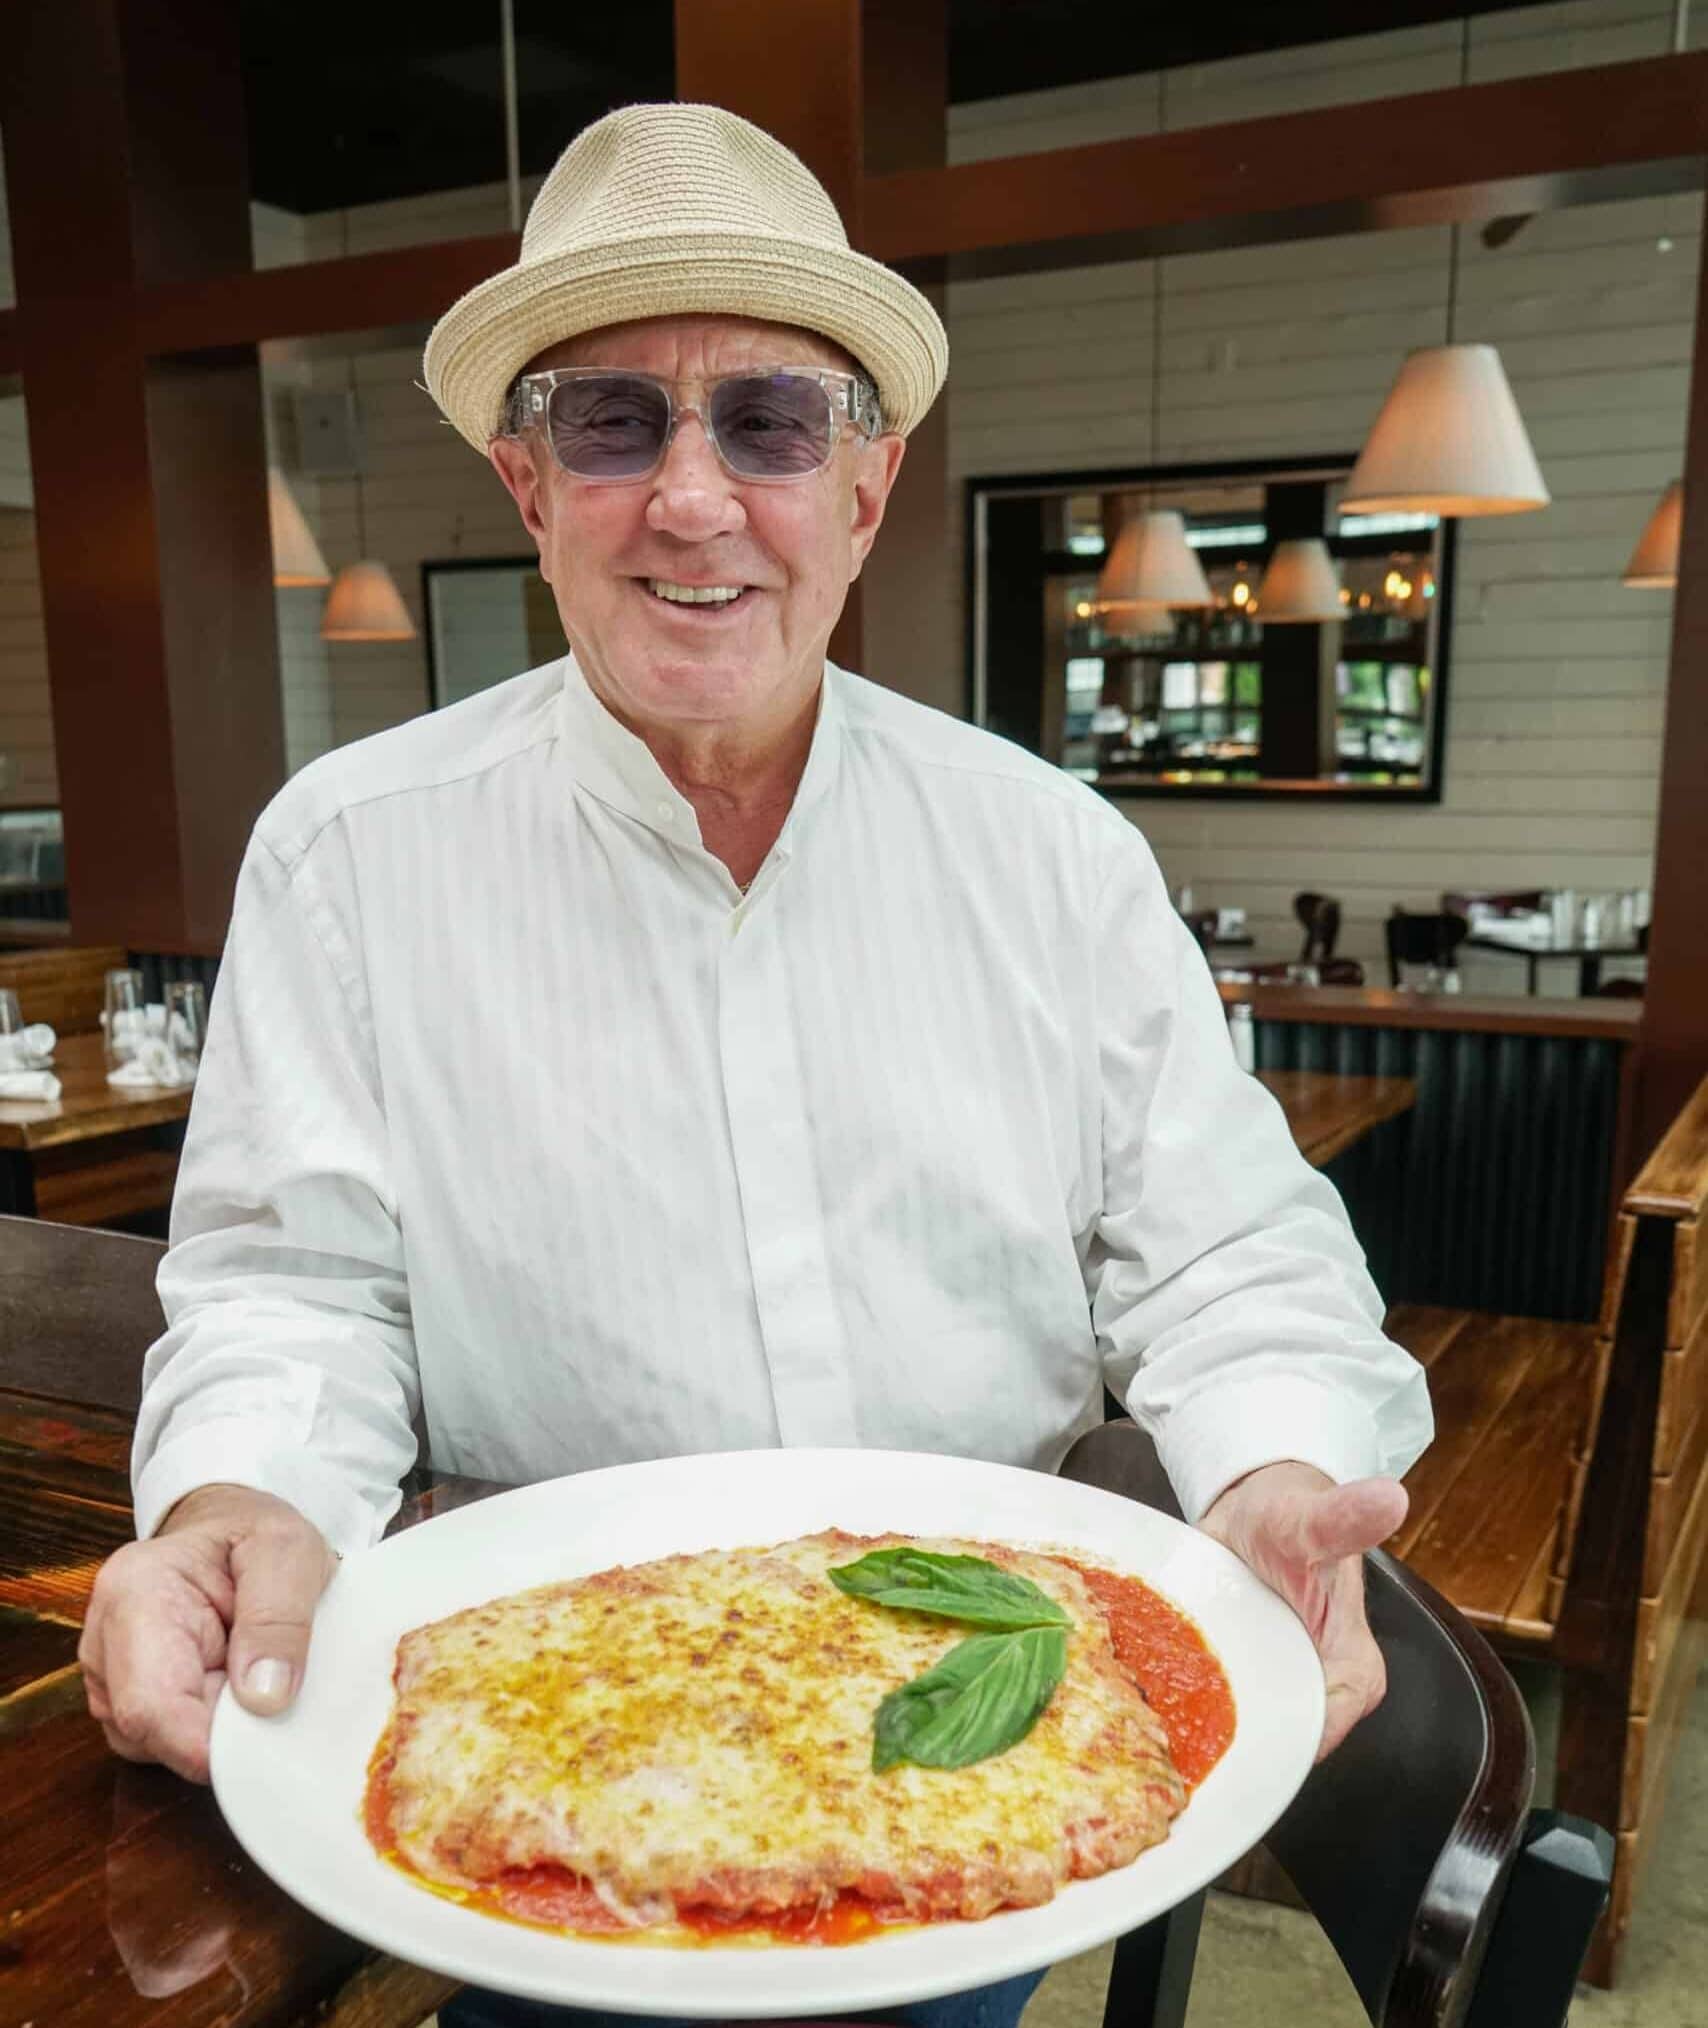 Rosebud’s founder, Alex Dana holding a large plate of food